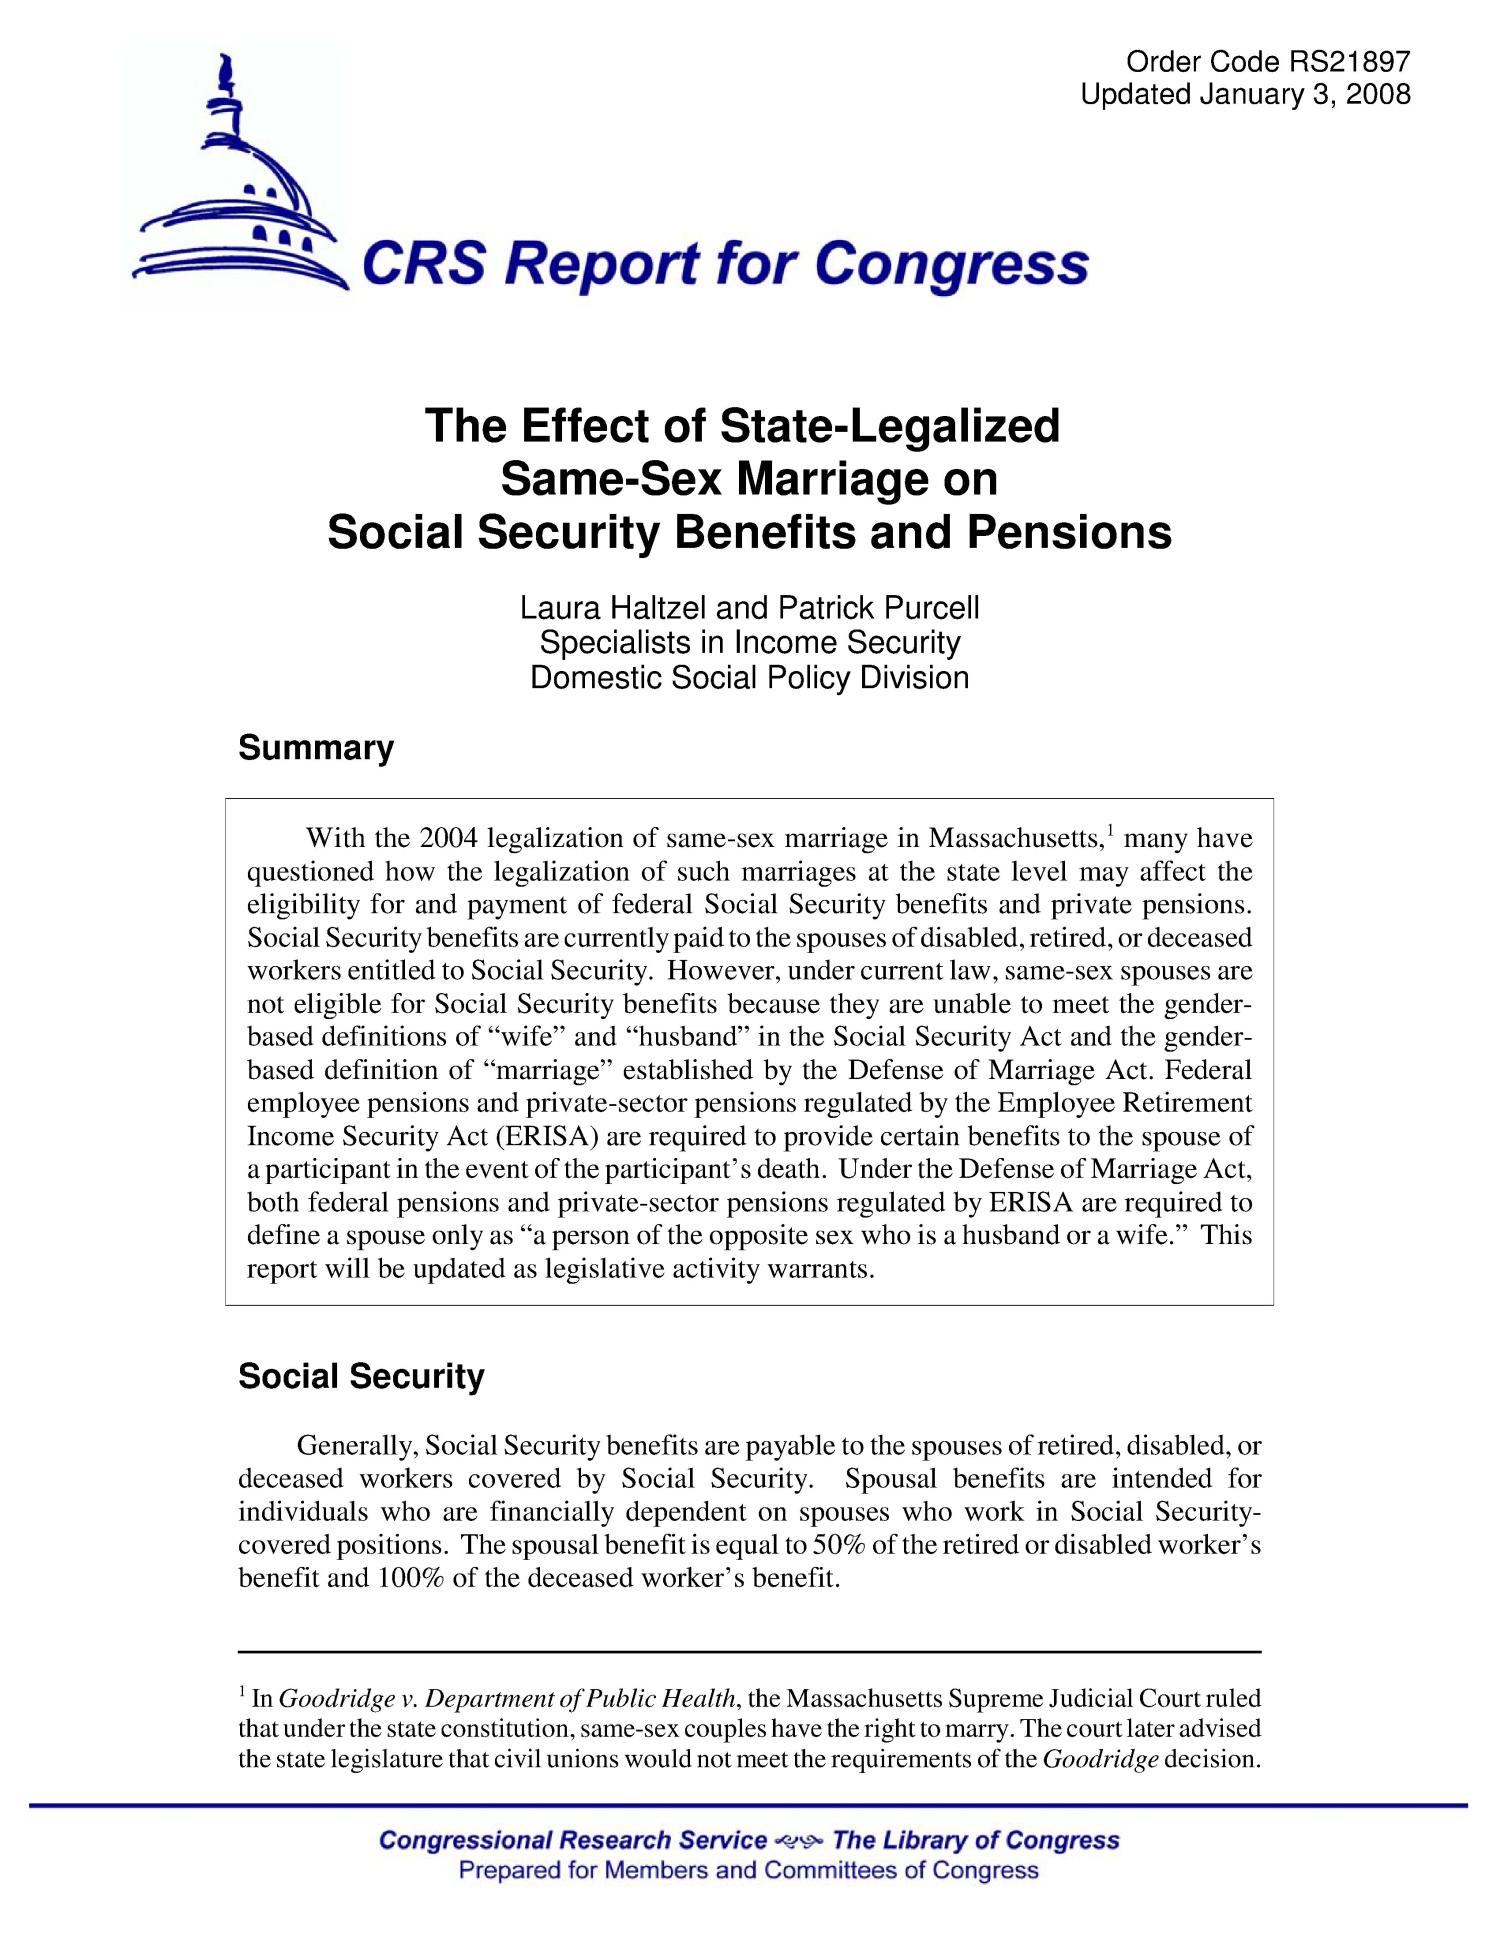 The Effect Of State Legalized Same Sex Marriage On Social Security 5794